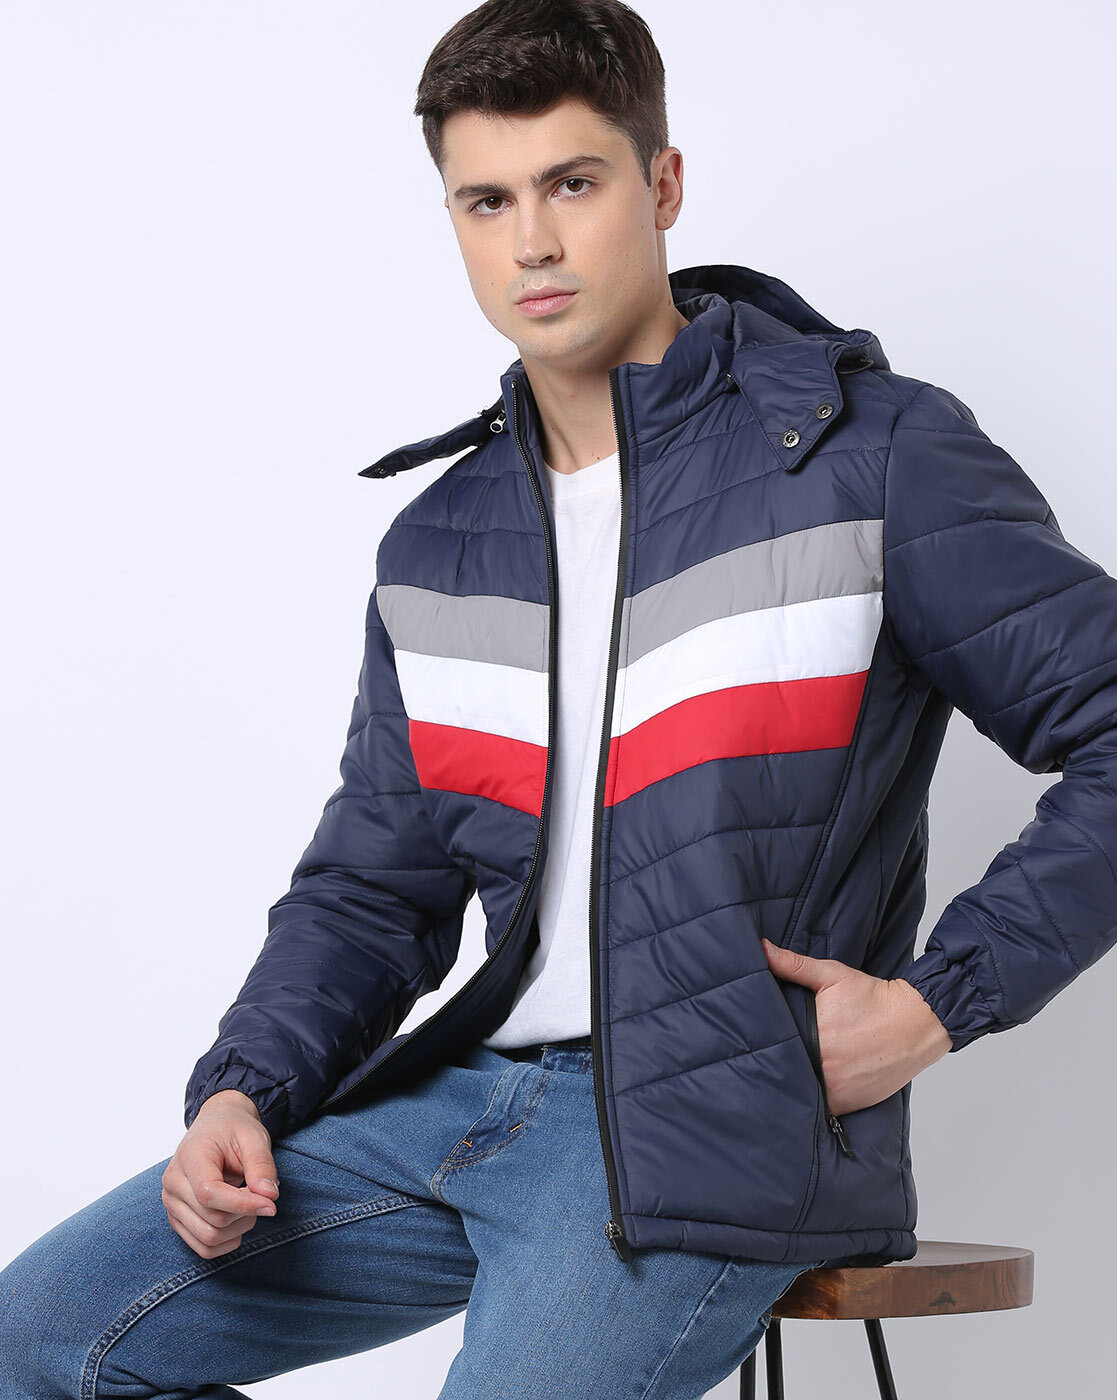 Reliance Trends Mens Winter Collection | Jackets | Full Sleeve T-SHIRTS |  Denims | With Price - YouTube